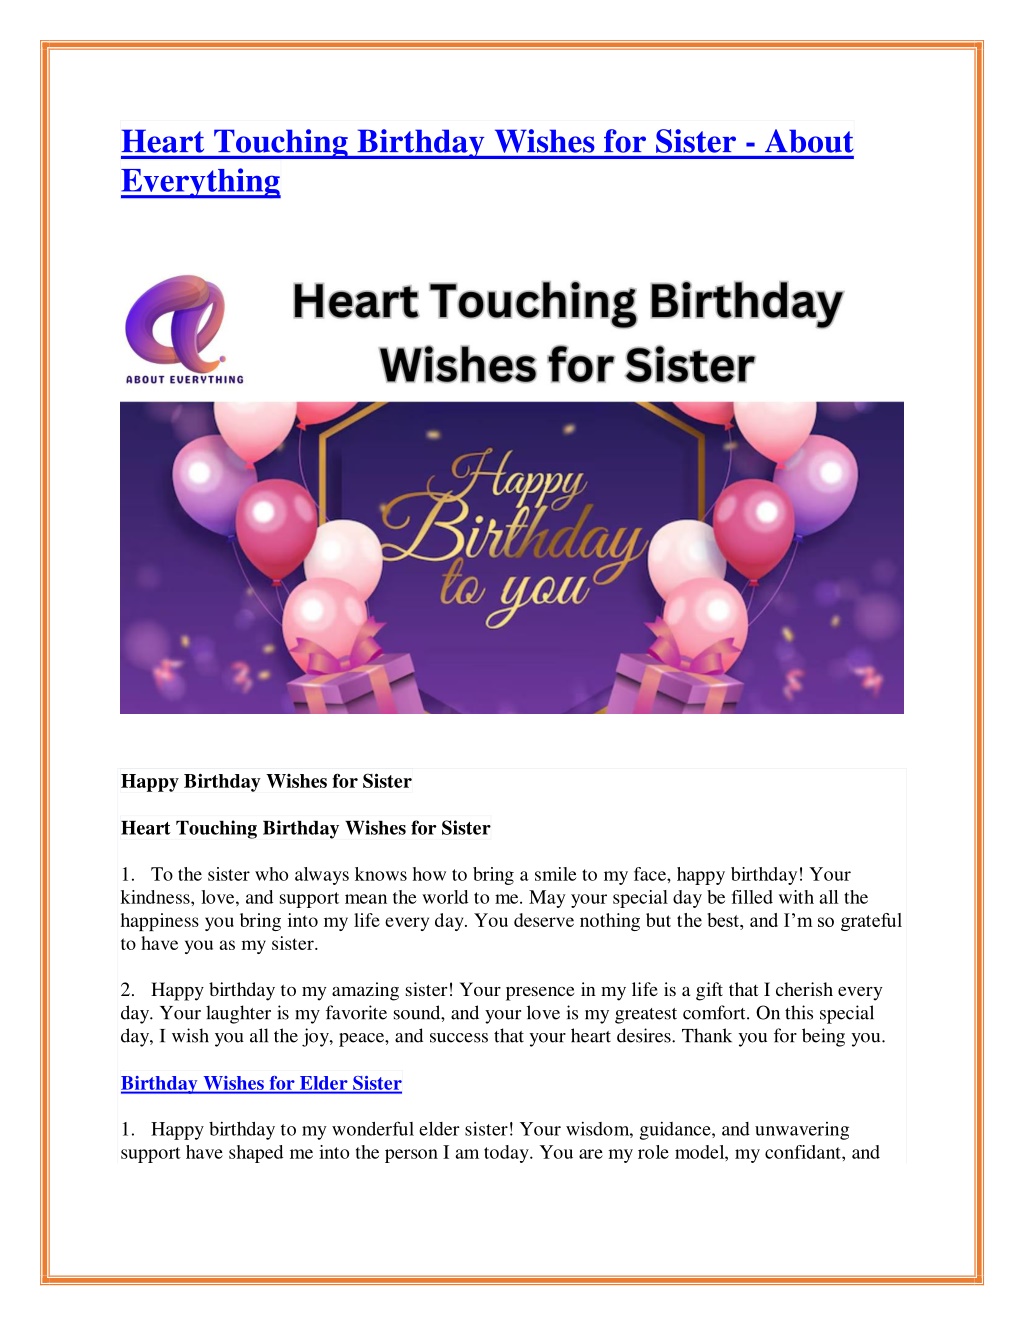 Ppt - Heart Touching Birthday Wishes For Sister Powerpoint Presentation 